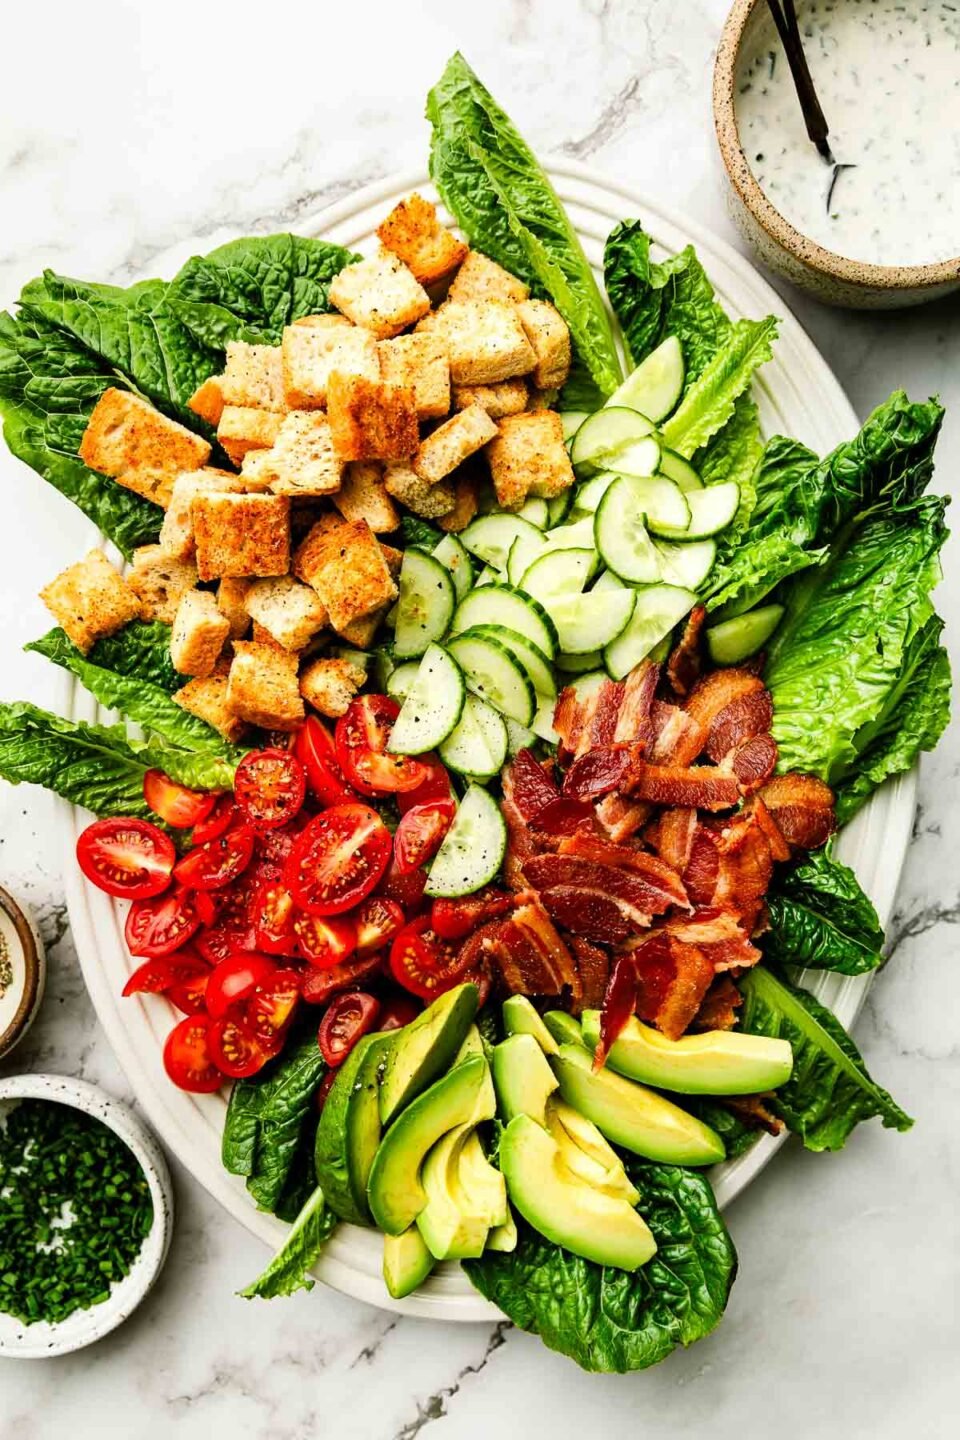 An overhead shot of BLT Salad components on a white oval platter: Lettuce, cucumbers, cherry tomatoes, bacon, avocado, and croutons.